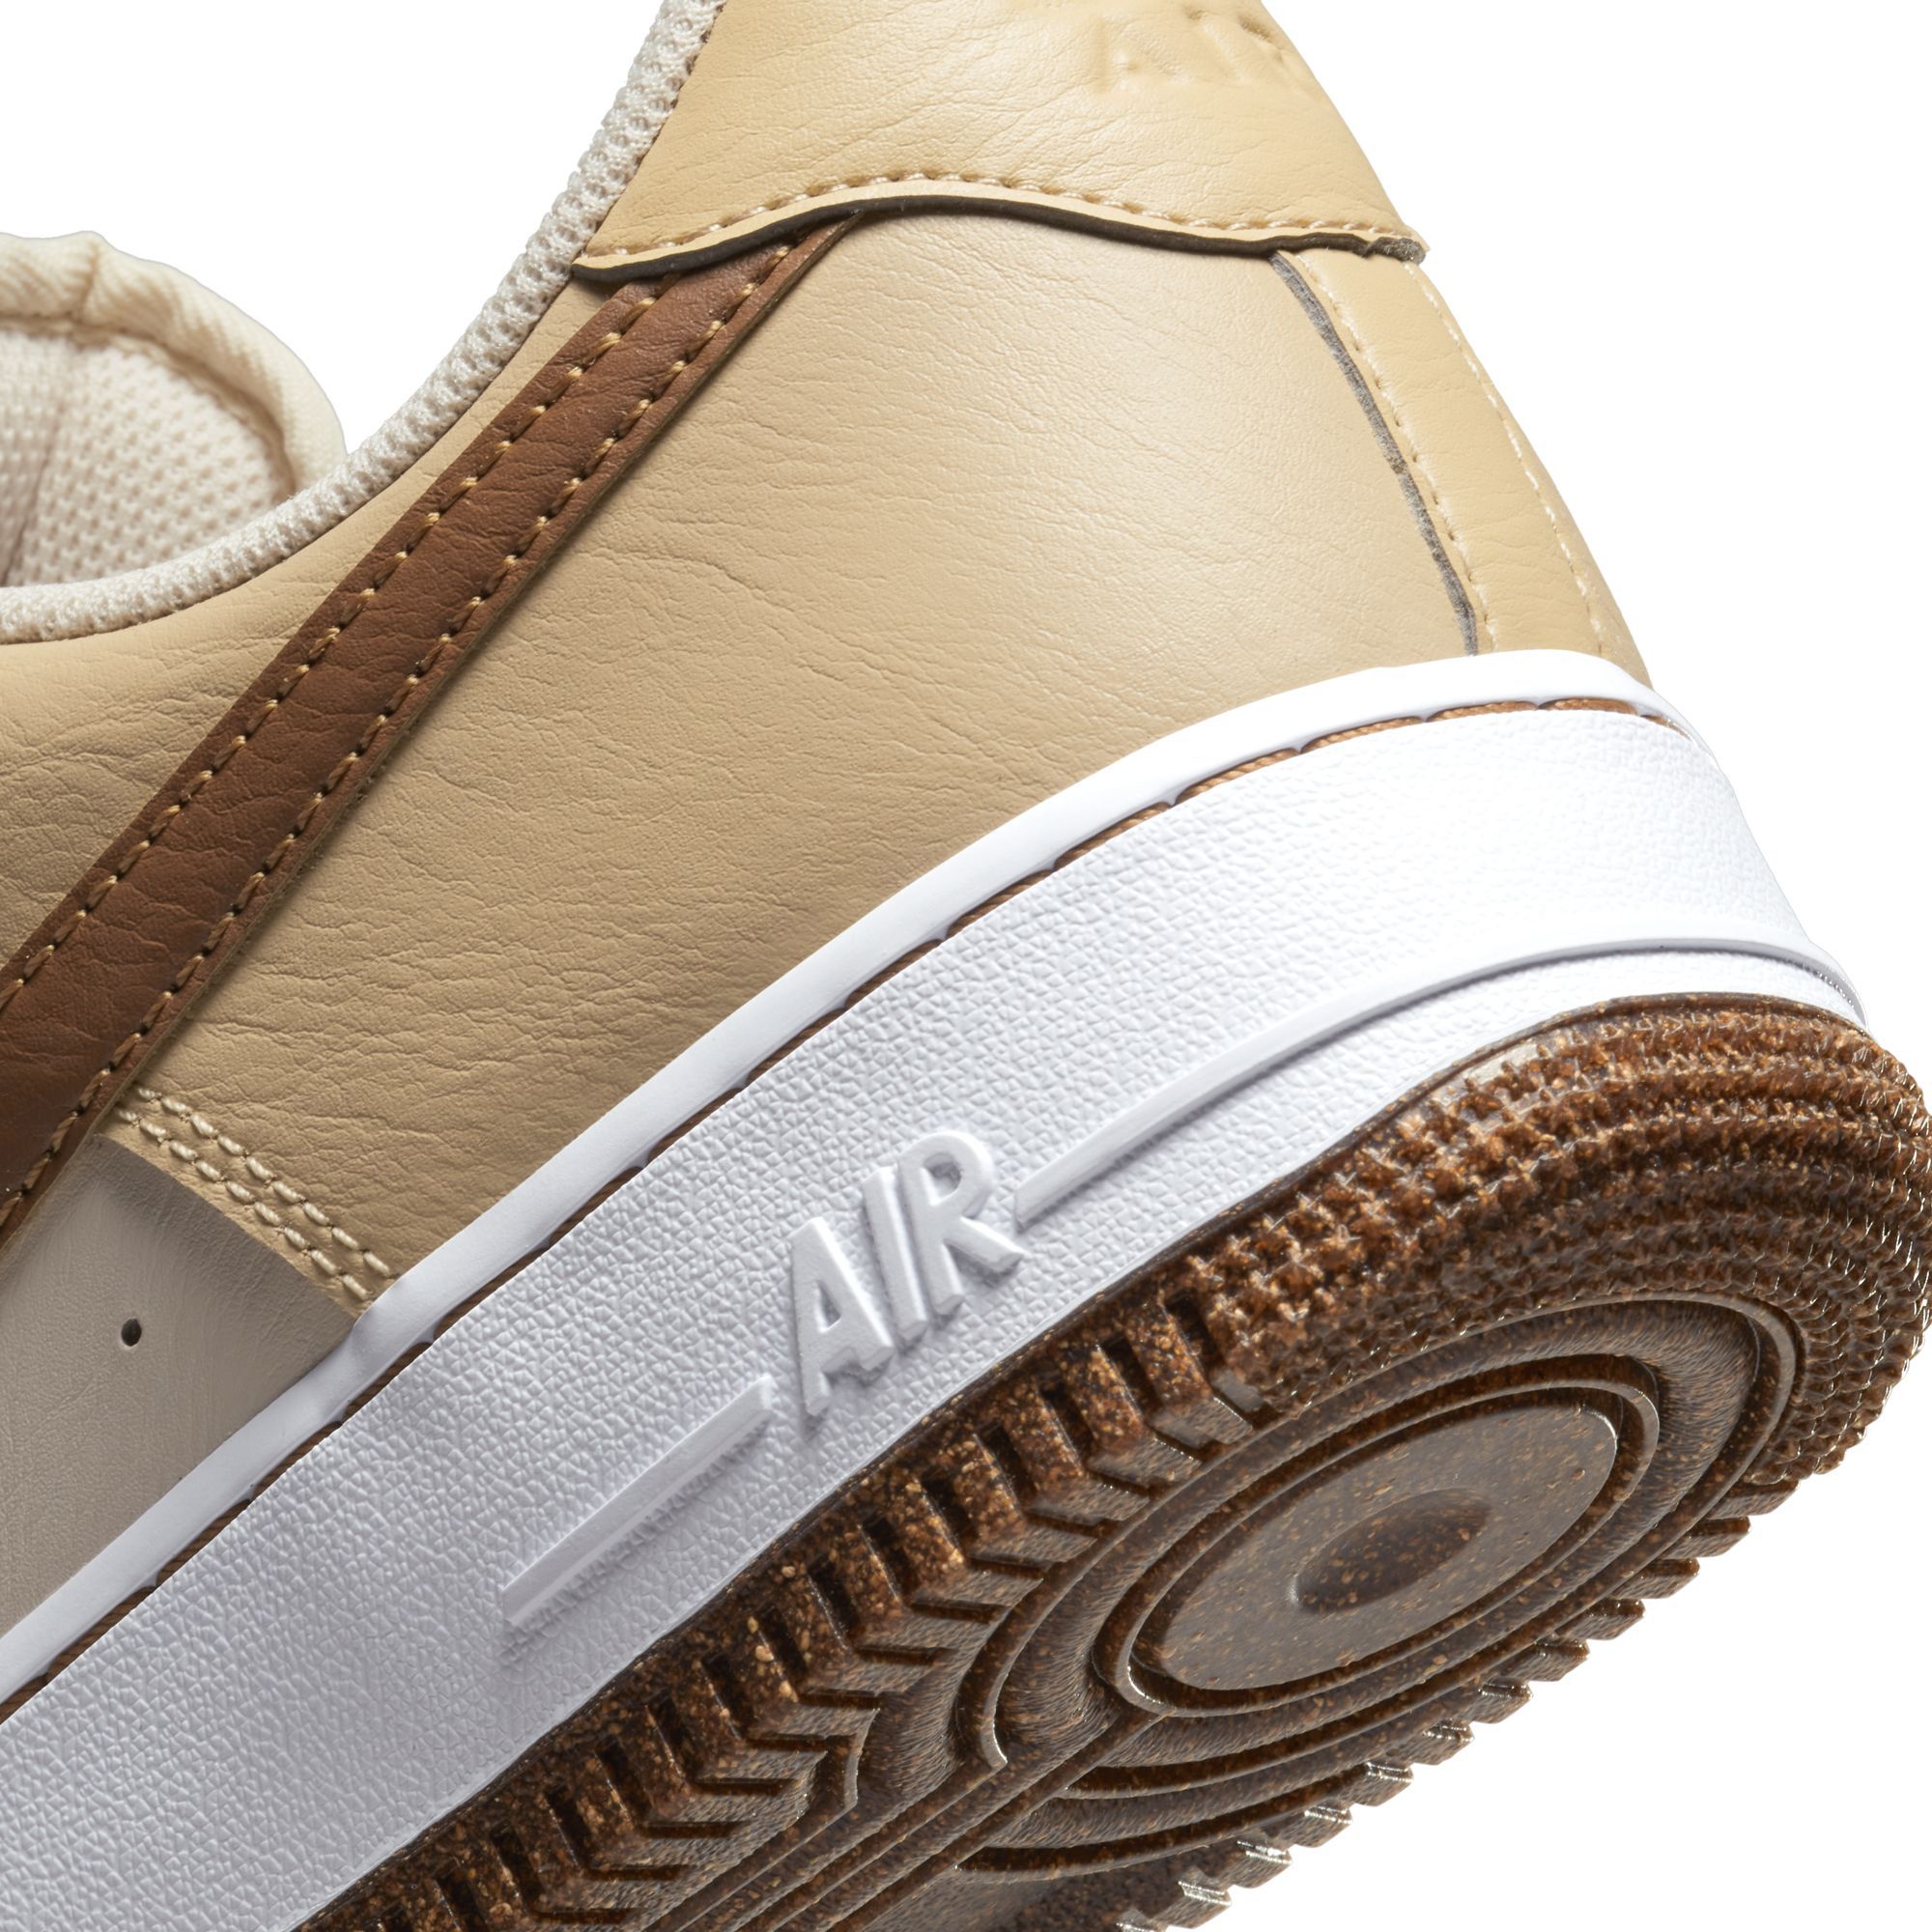 Buy Nike Air Force 1 Low '07 LV8 Inspected by Swoosh - Stadium Goods